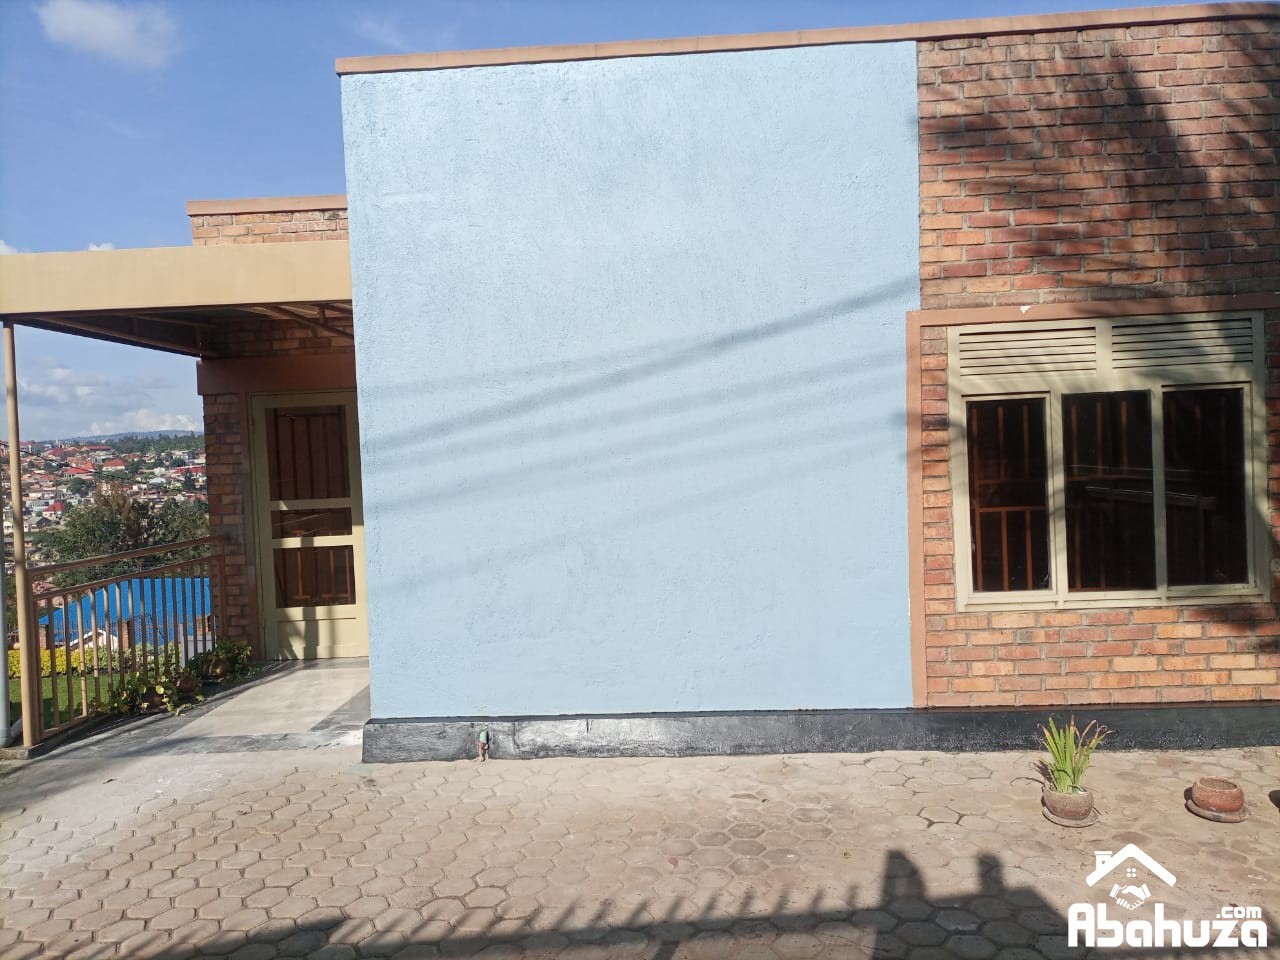 A 3 BEDROOM HOUSE FOR RENT IN KIGALI AT NIBOYE